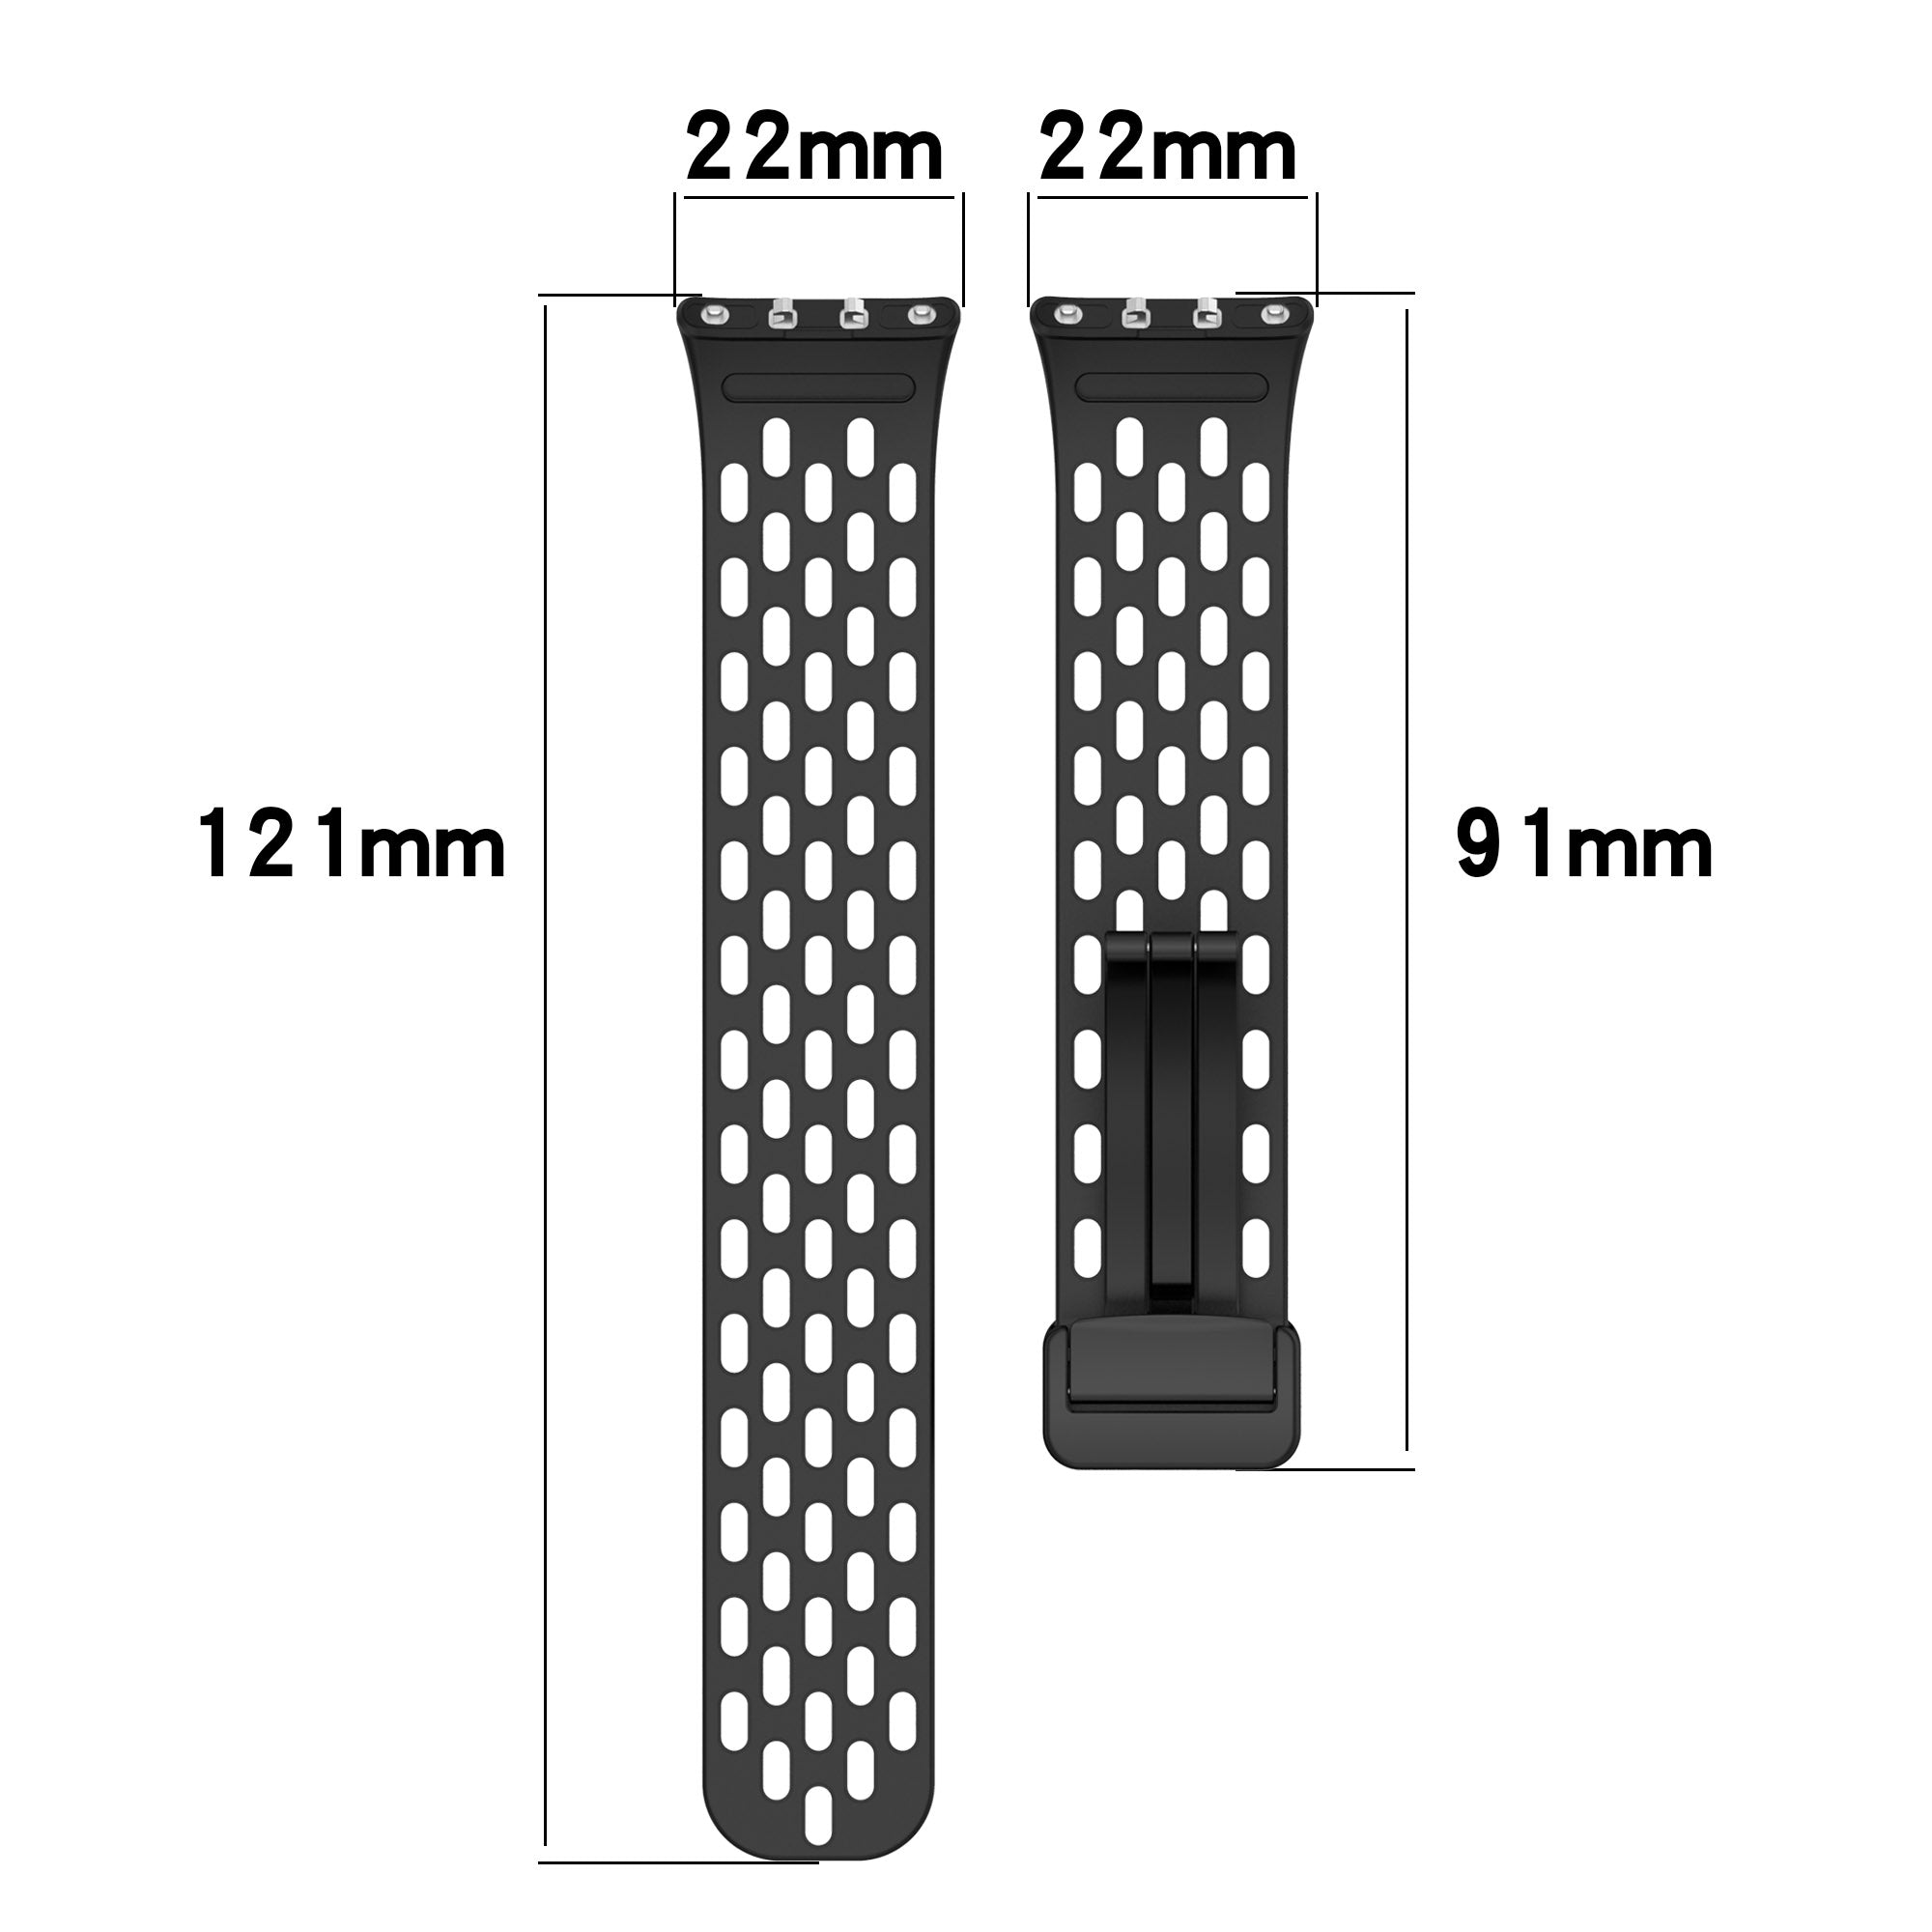 Wrist Band for Samsung Galaxy Fit3 R930 Magnetic Silicone Smartwatch Bracelet Strap - Grey